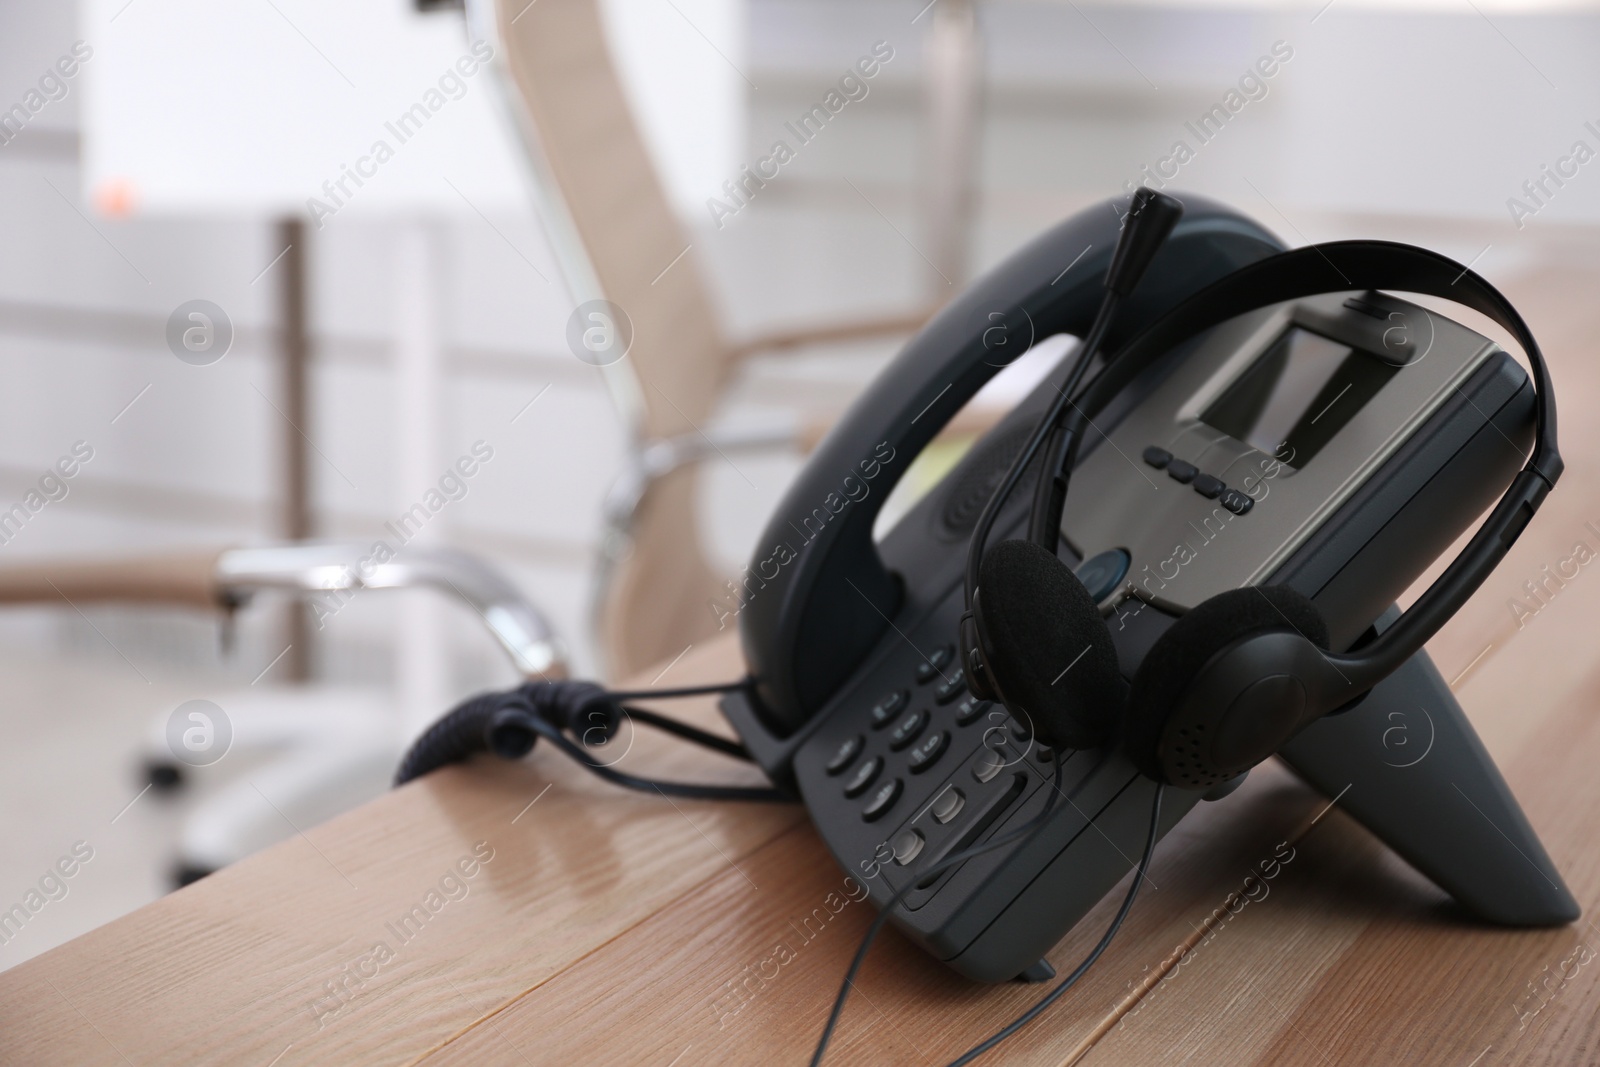 Photo of Desktop telephone and headset on wooden table in office, space for text. Hotline service